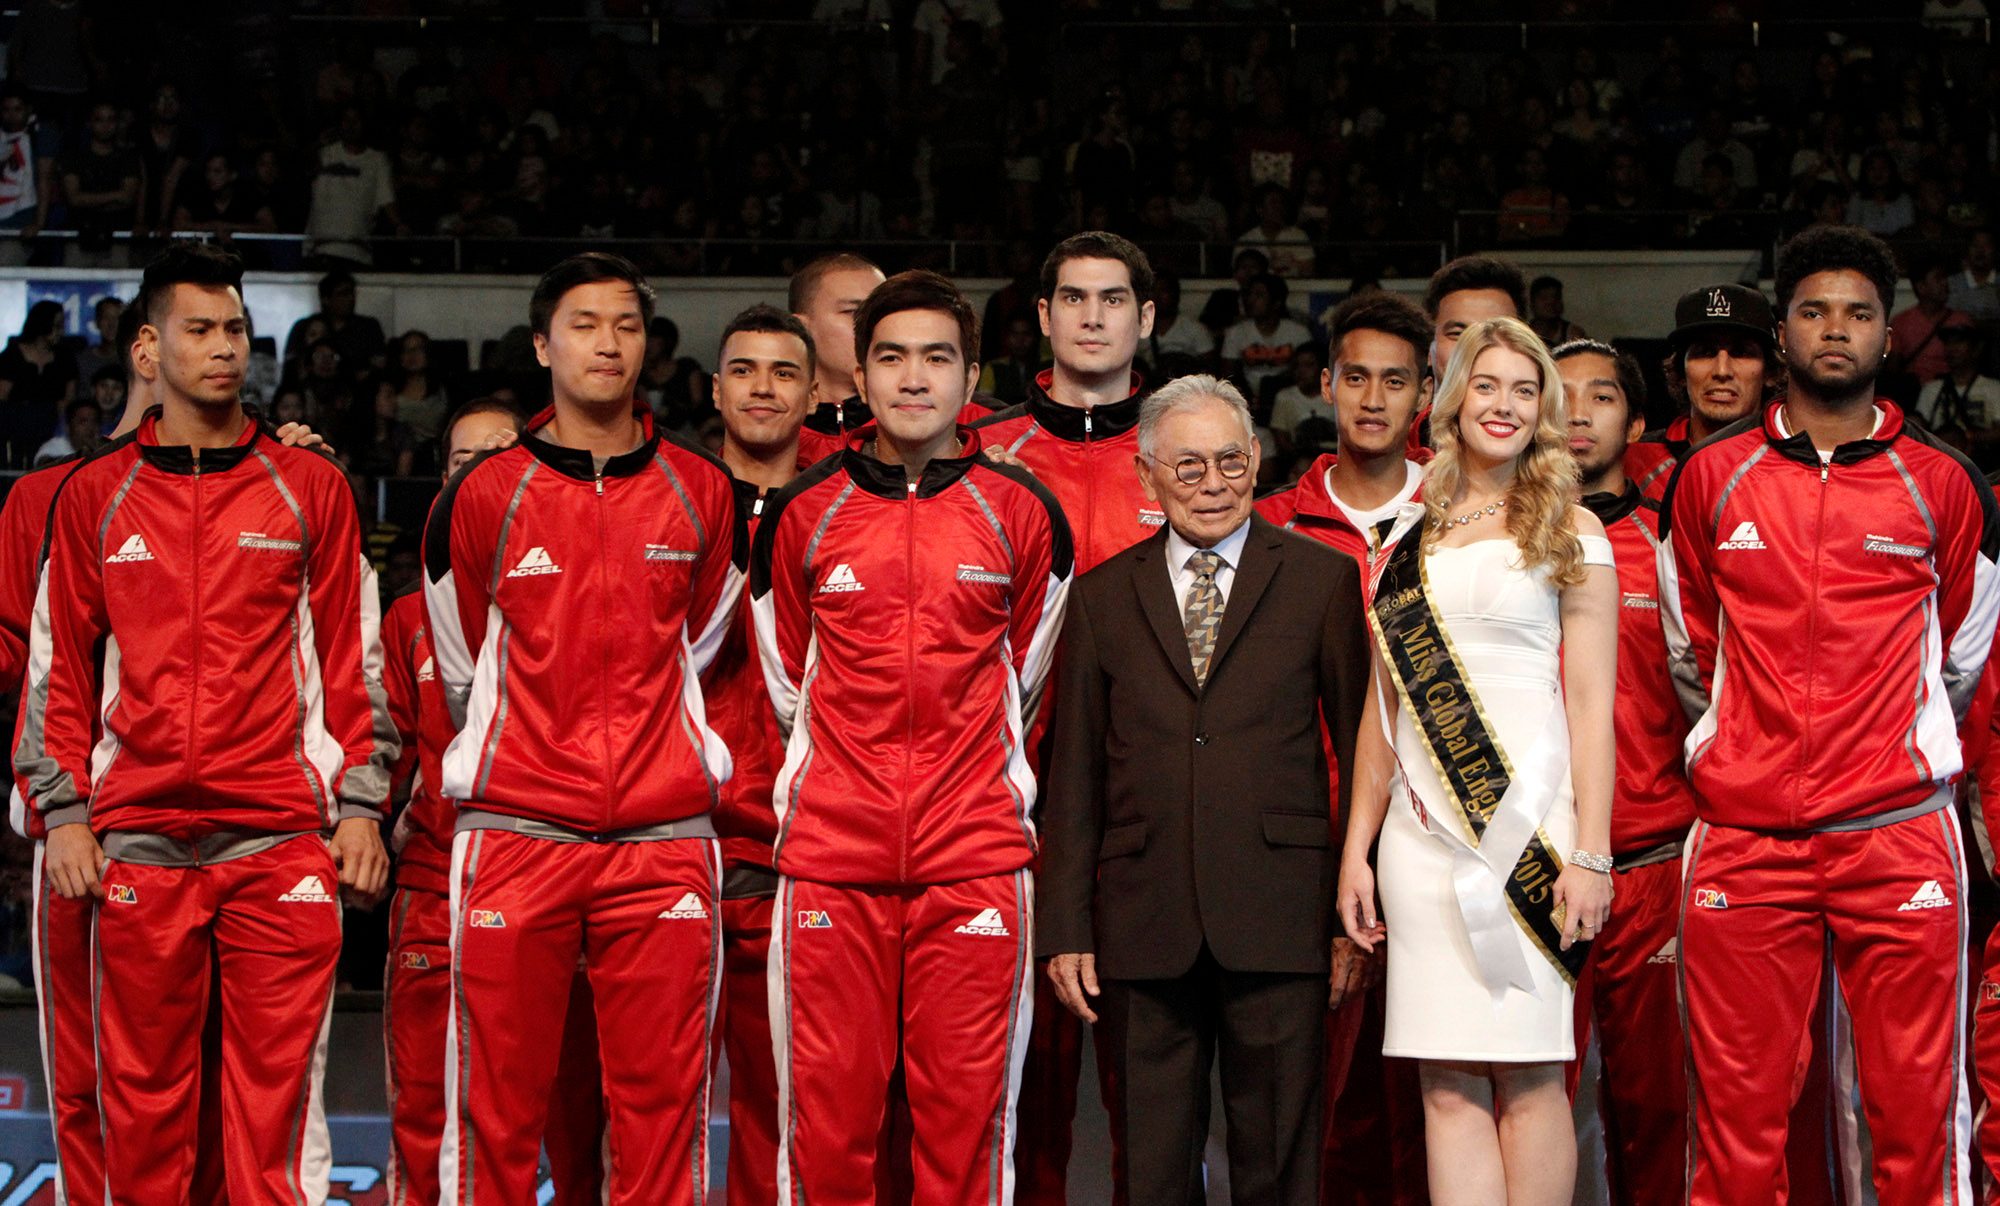 The Mahindra Flood Buster with Miss Global England 2015 Sophia Rankin. Photo from PBA Images 